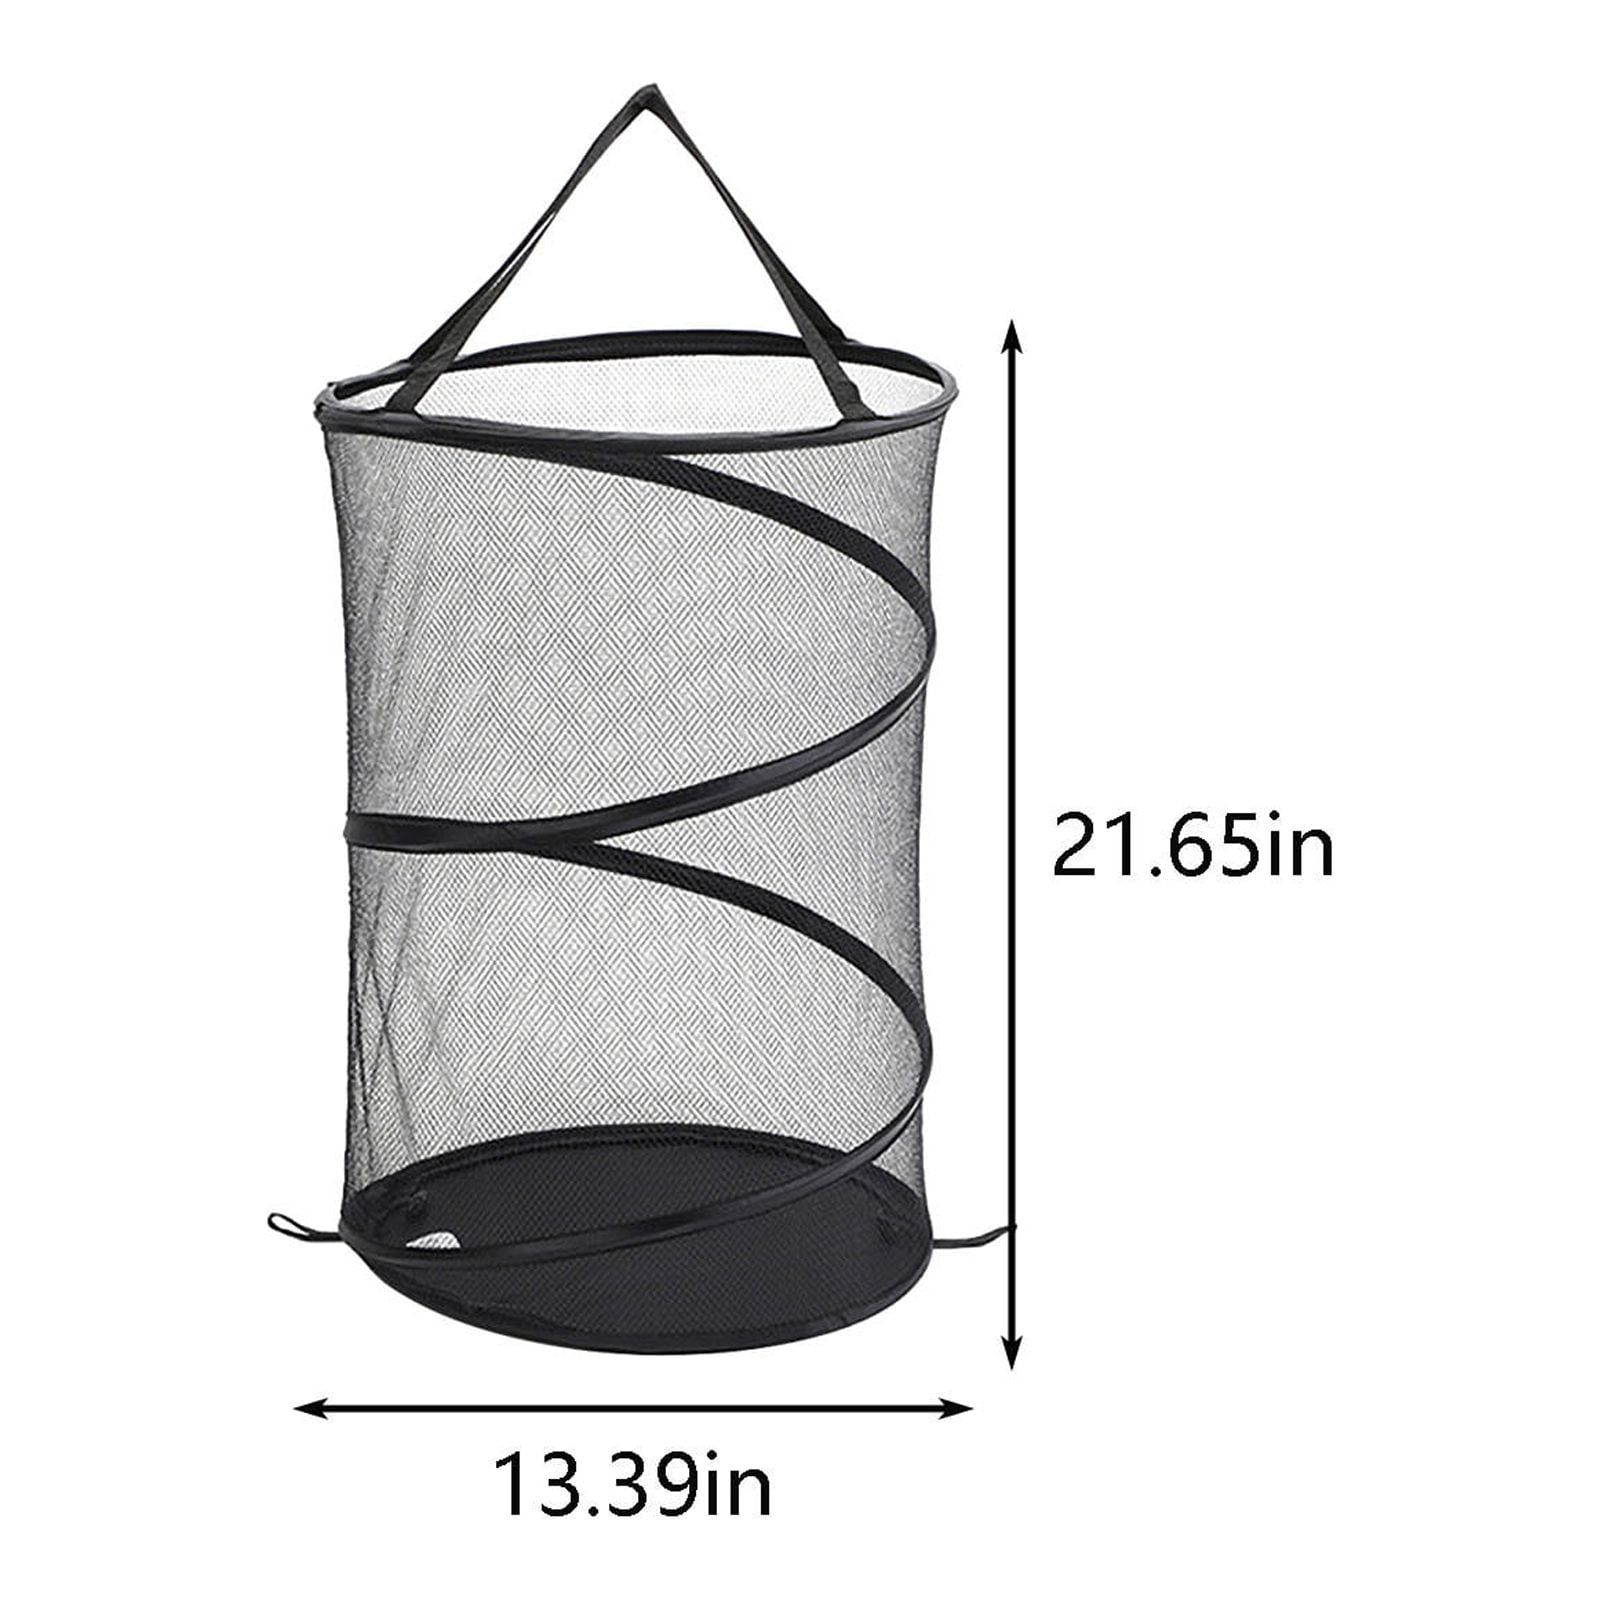 Manunclaims Mesh Popup Laundry Hamper with Portable, Durable Handles,  Collapsible for Storage, Foldable Pop-Up Laundry Bags for Kids Room,  College Dorm or Travel 